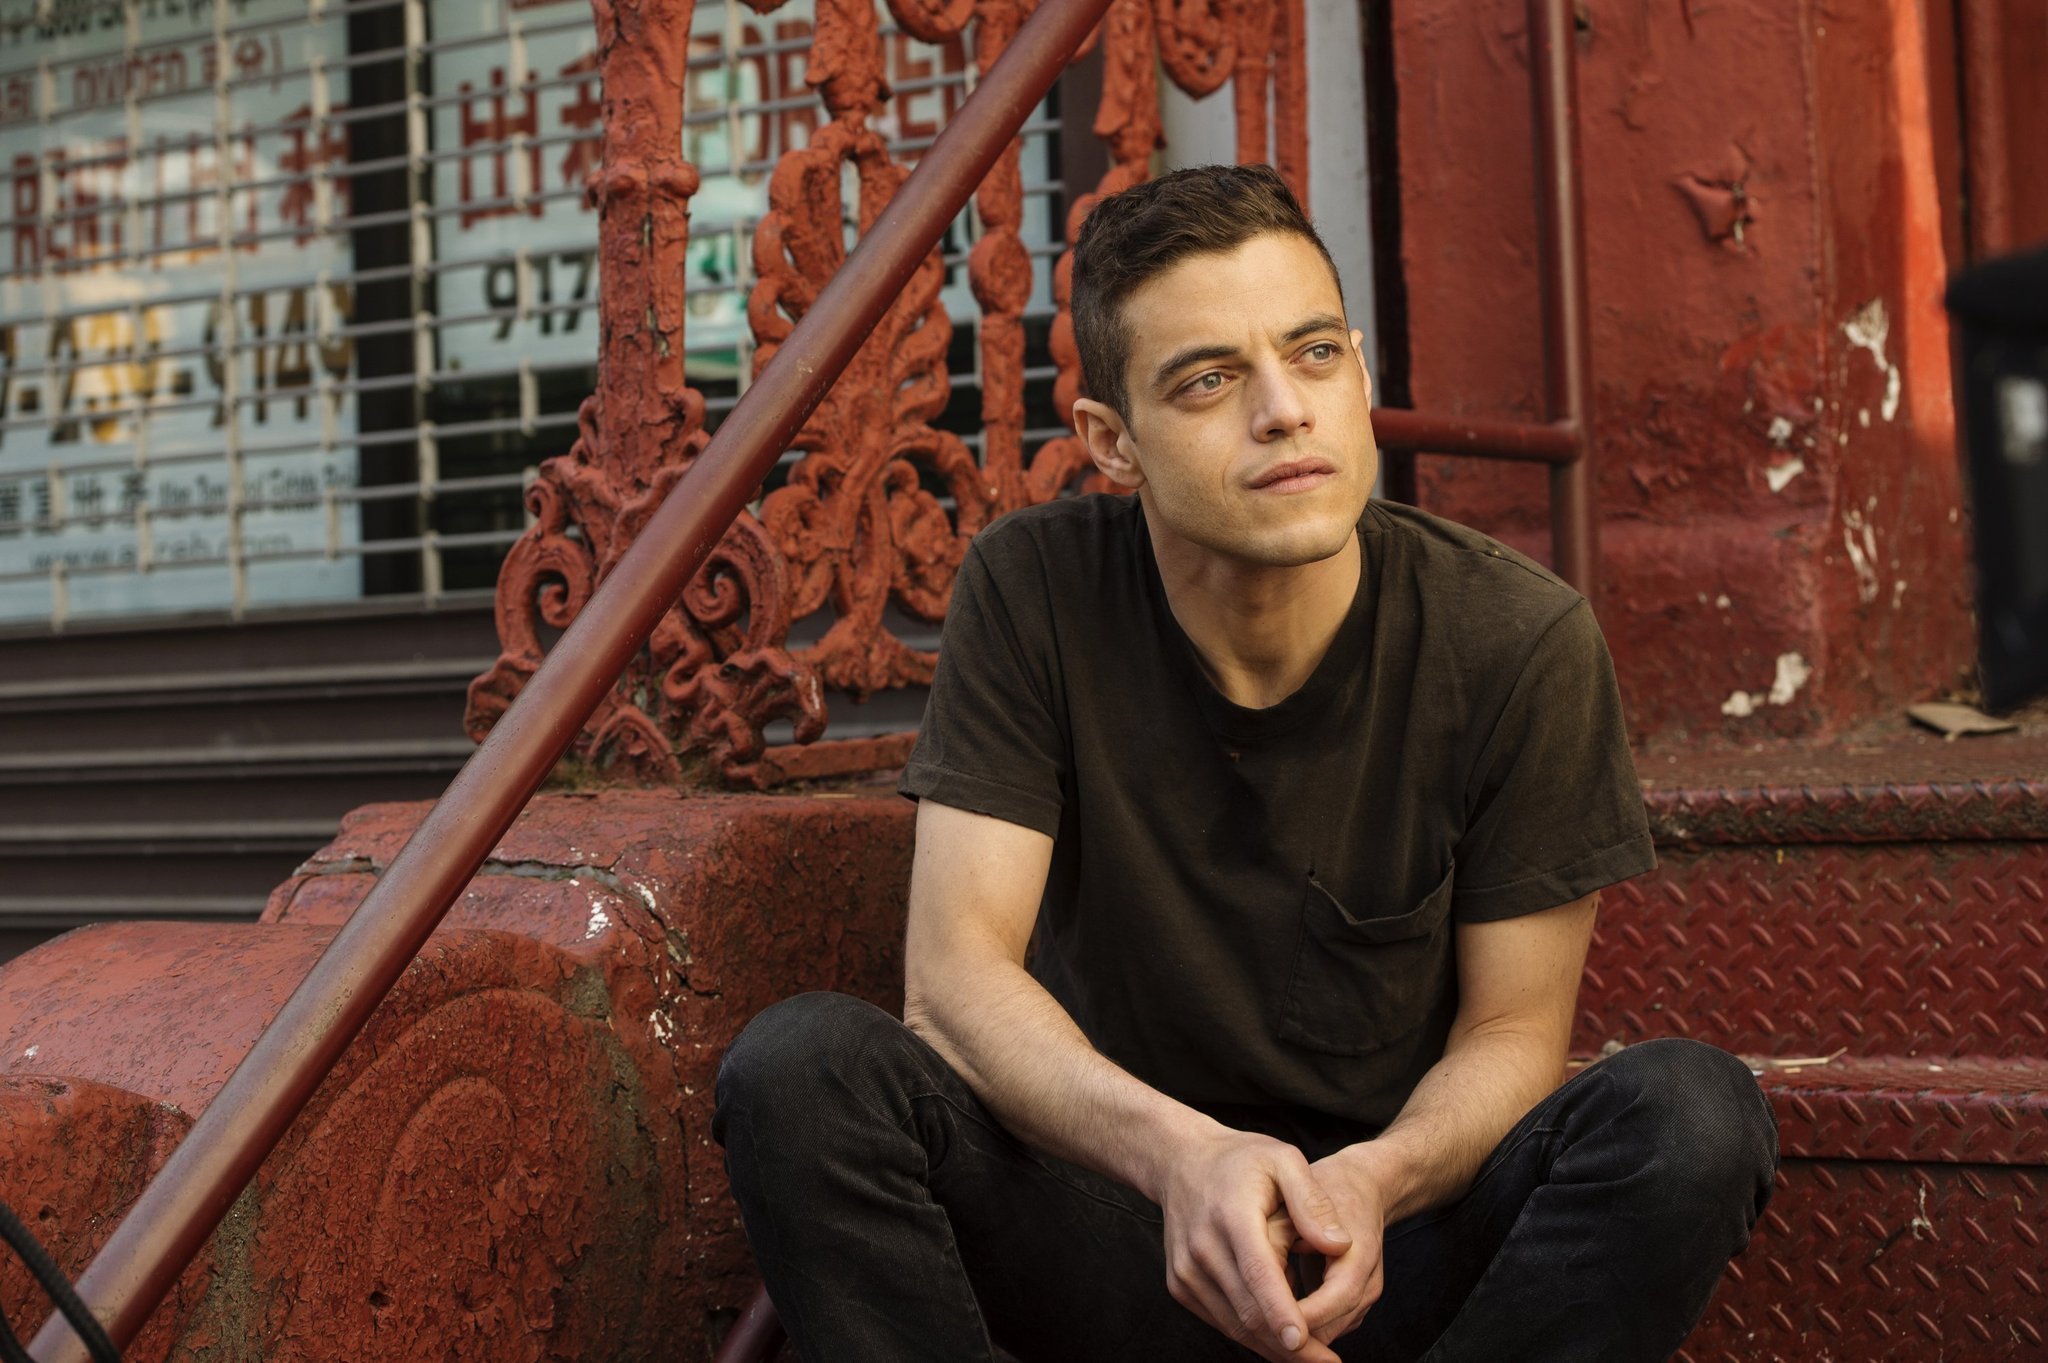 rami-malek-stays-humble-in-the-face-of-overwhelming-acclaim-for-mr